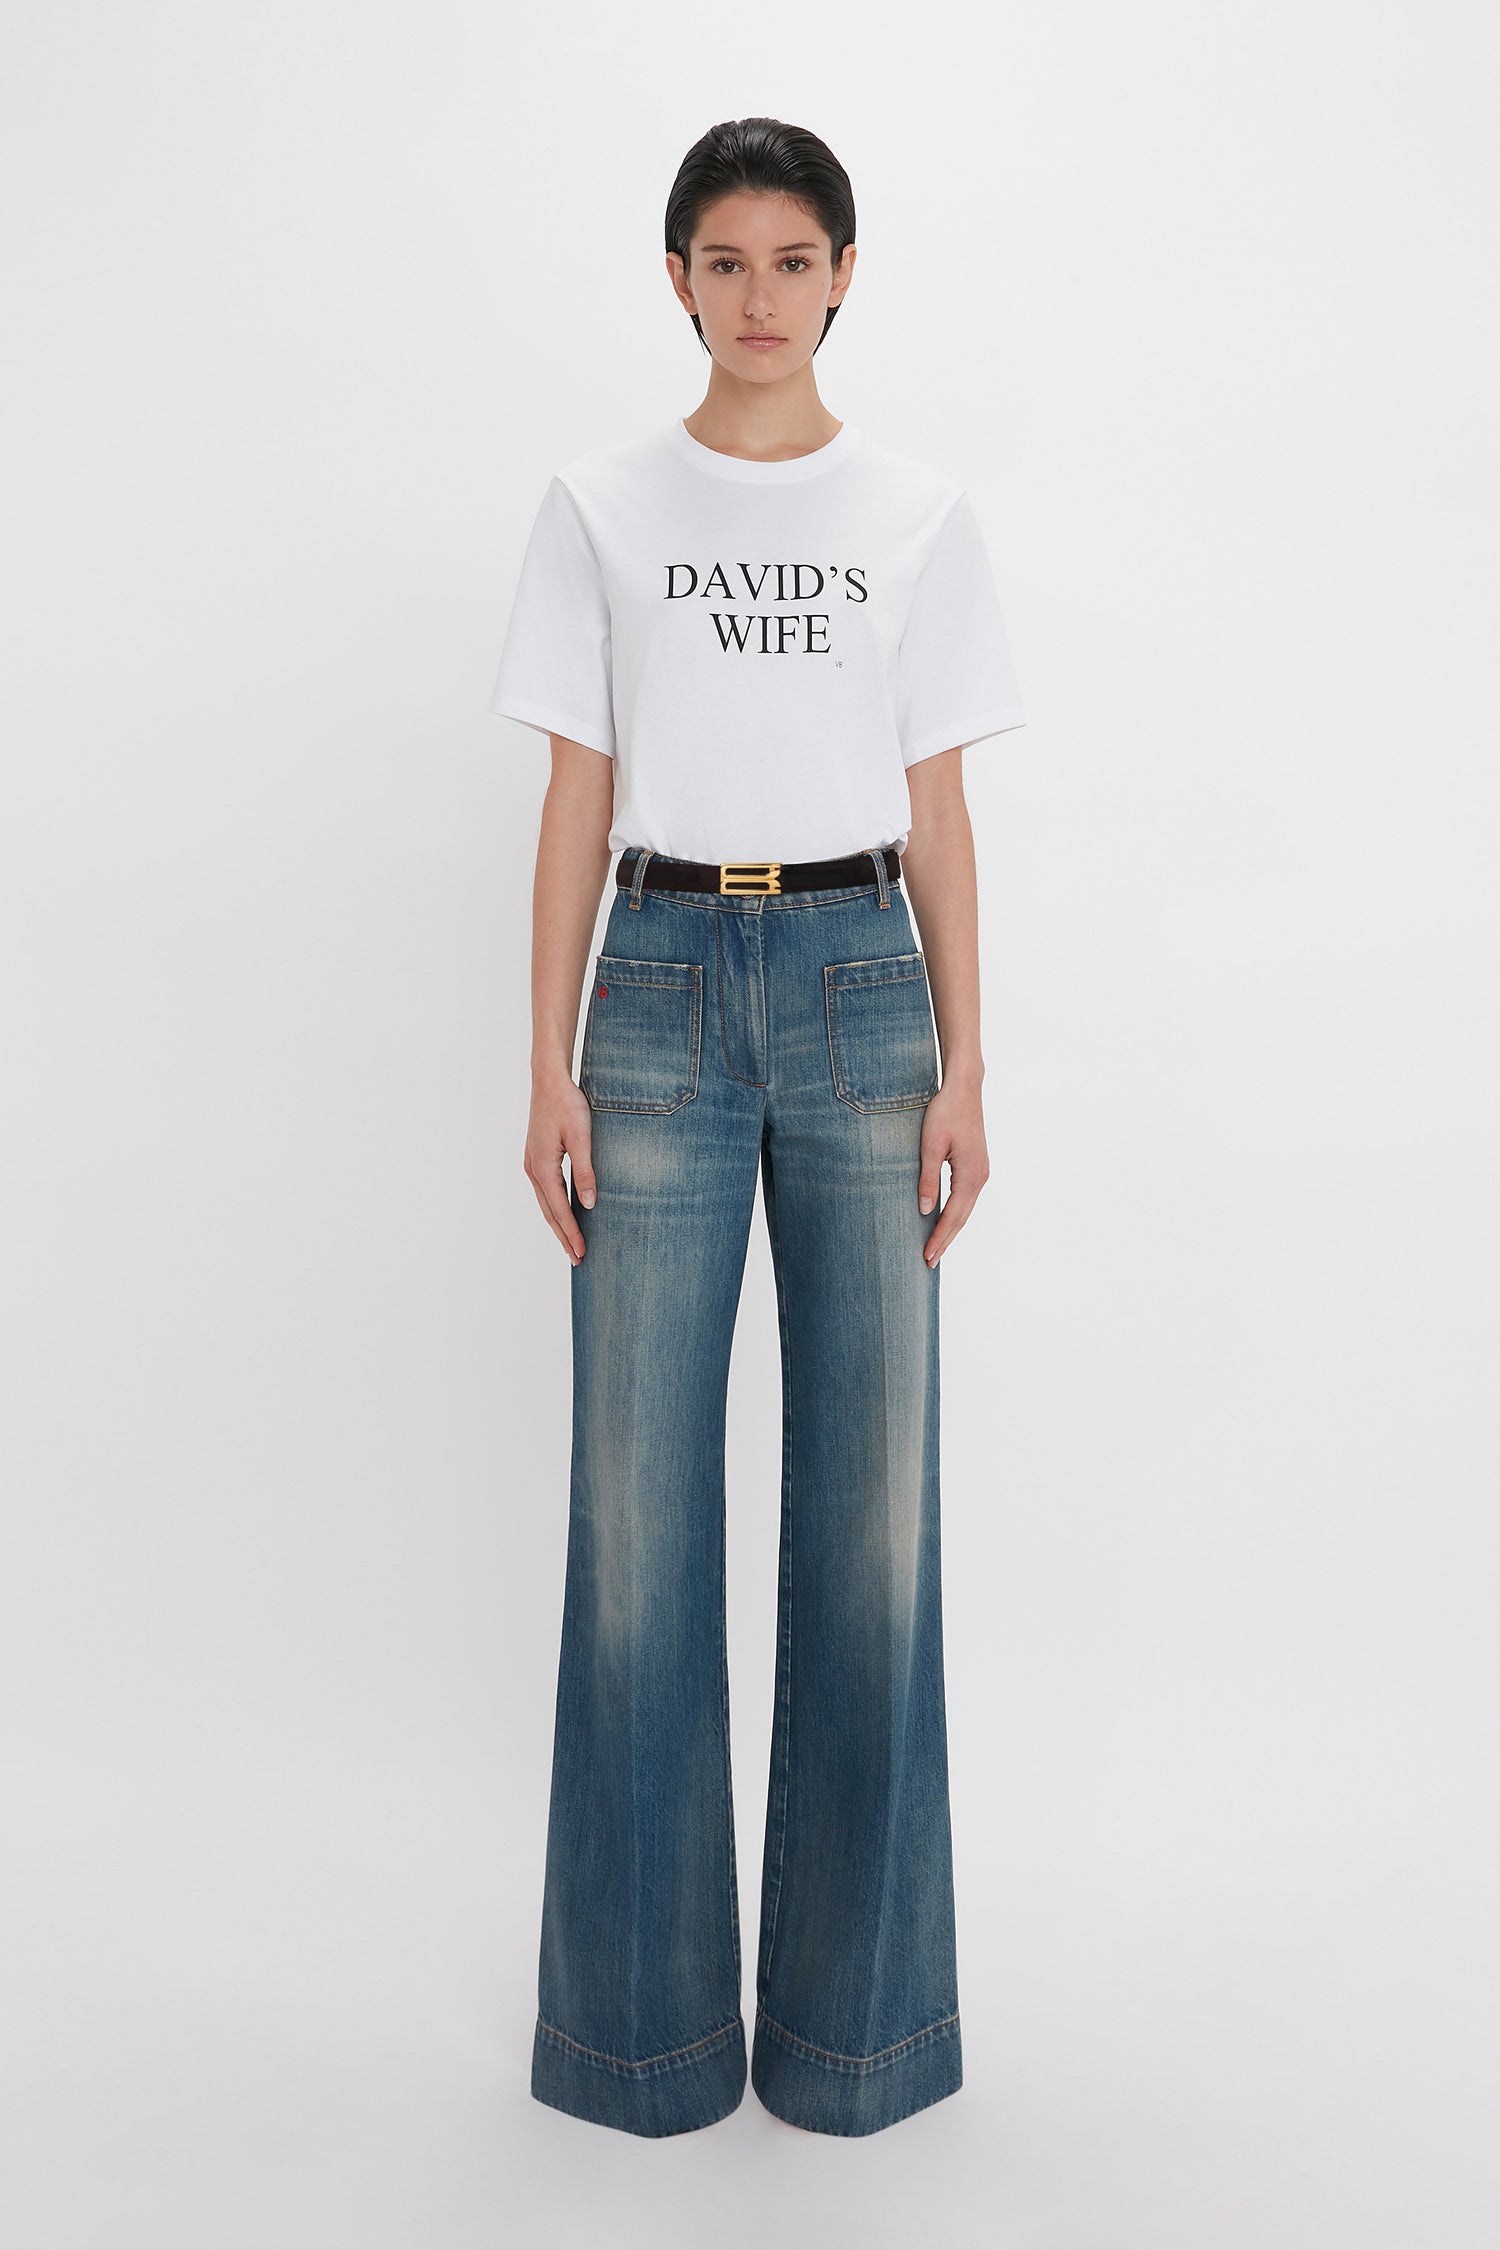 Woman wearing a white t-shirt labeled "David's wife" and high-waisted Alina Jean In Indigrey Wash denim jeans with a black belt, standing against a plain white background, designed by Victoria Beckham.